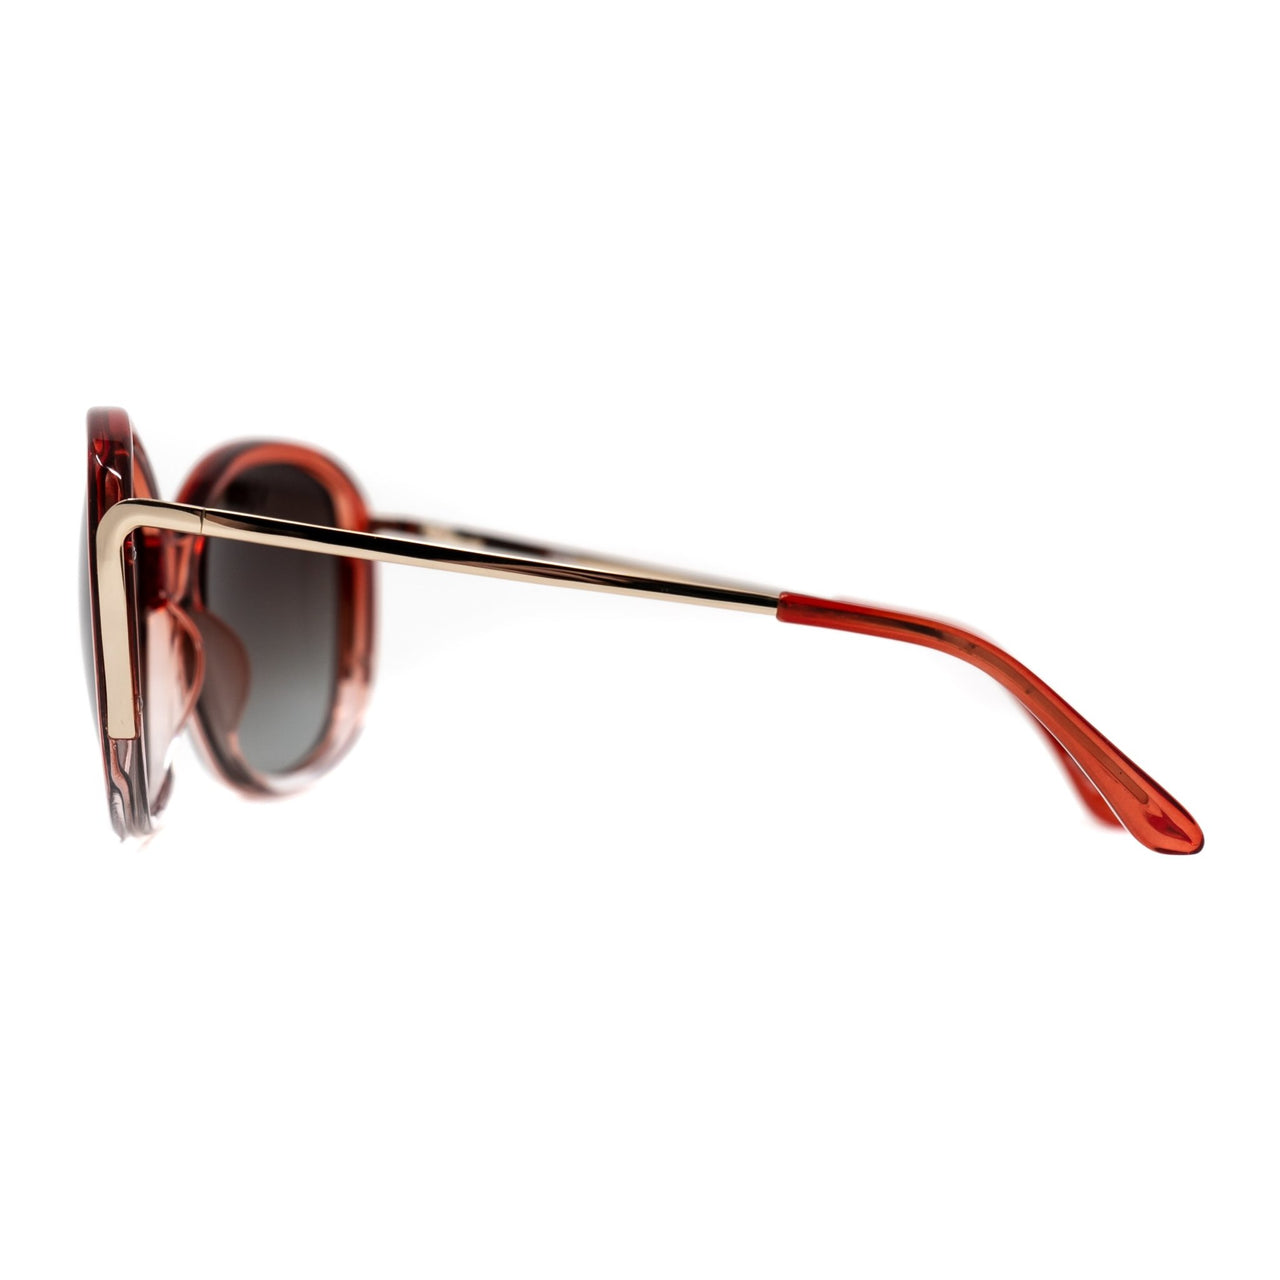 Prabal Gurung Sunglasses Oversized Red and Grey – Watches & Crystals